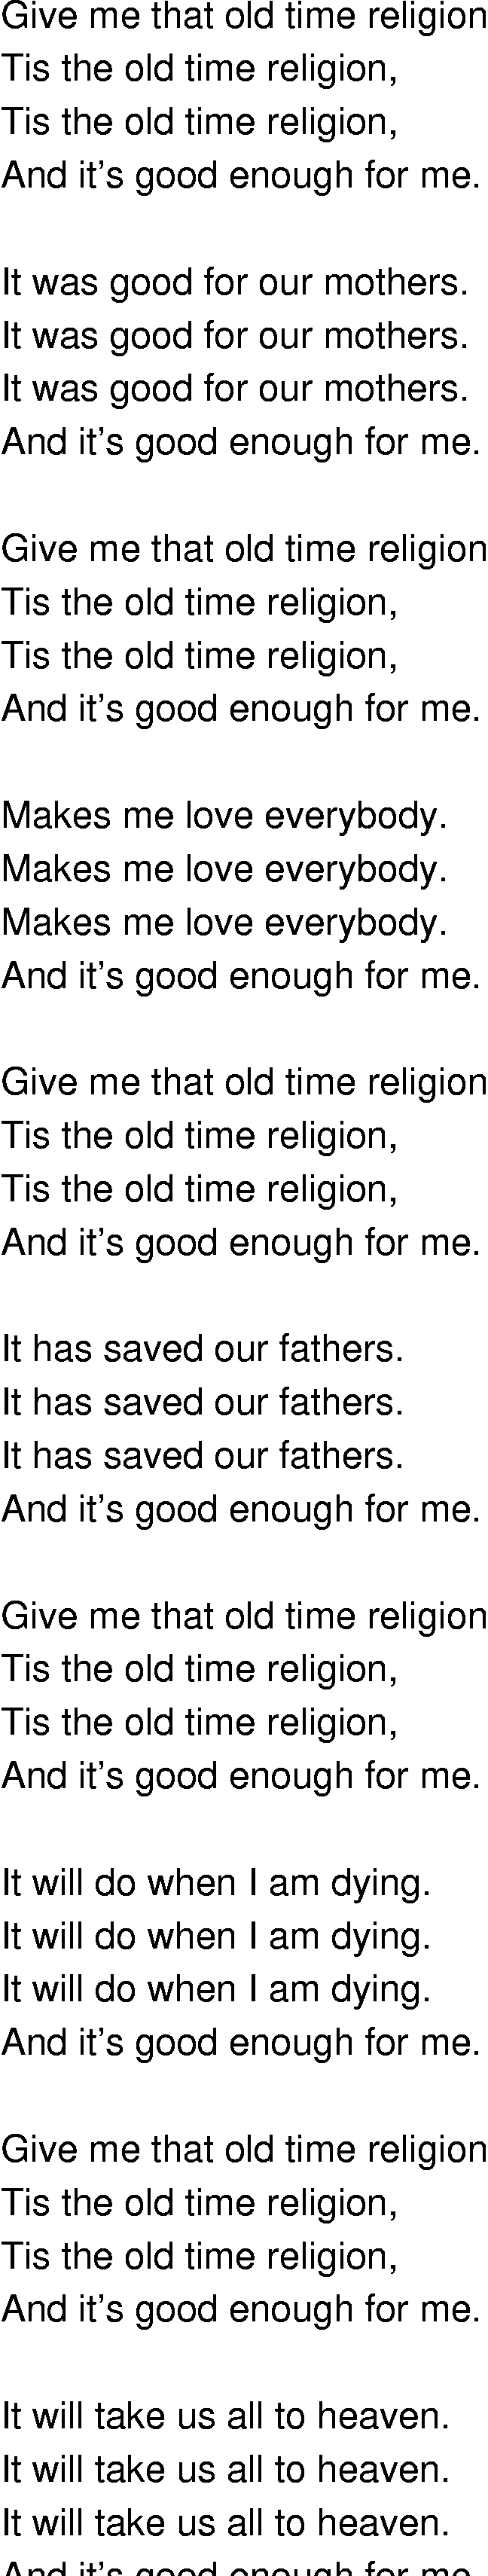 Old-Time (oldtimey) Song Lyrics - give me that old time religion